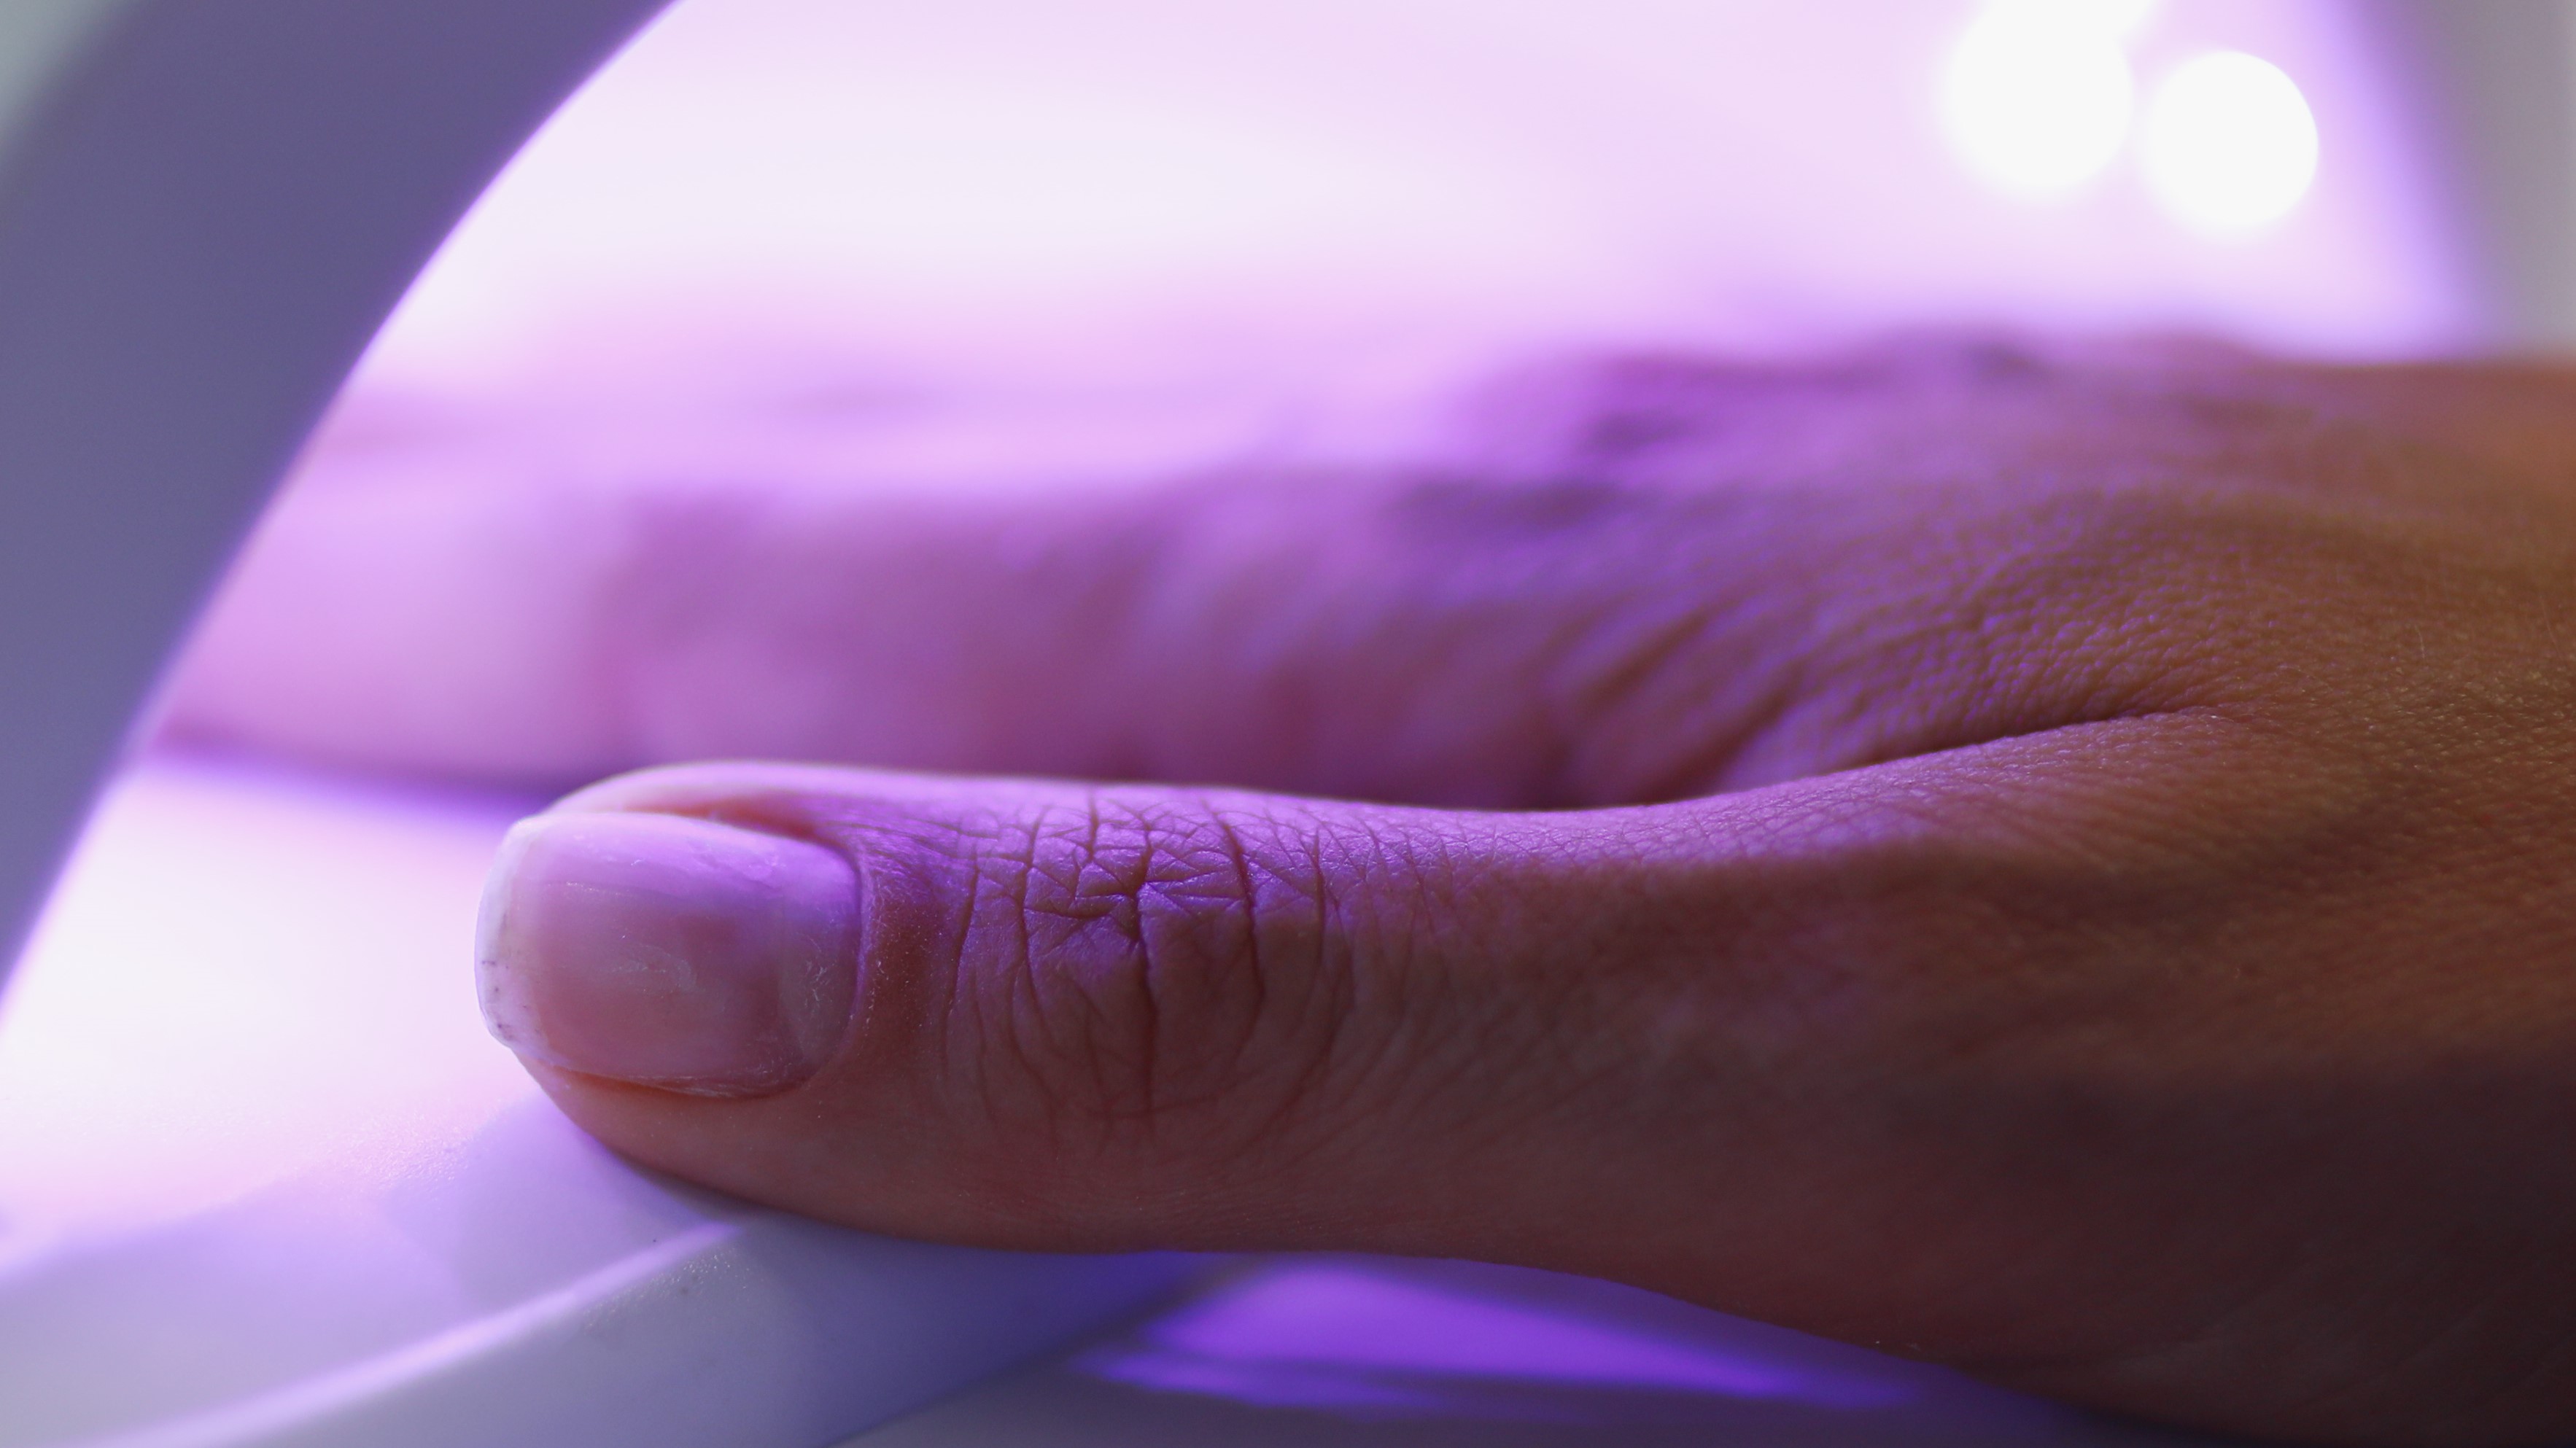 Can Ultraviolet Nail Salon Lamps Give You Skin Cancer?